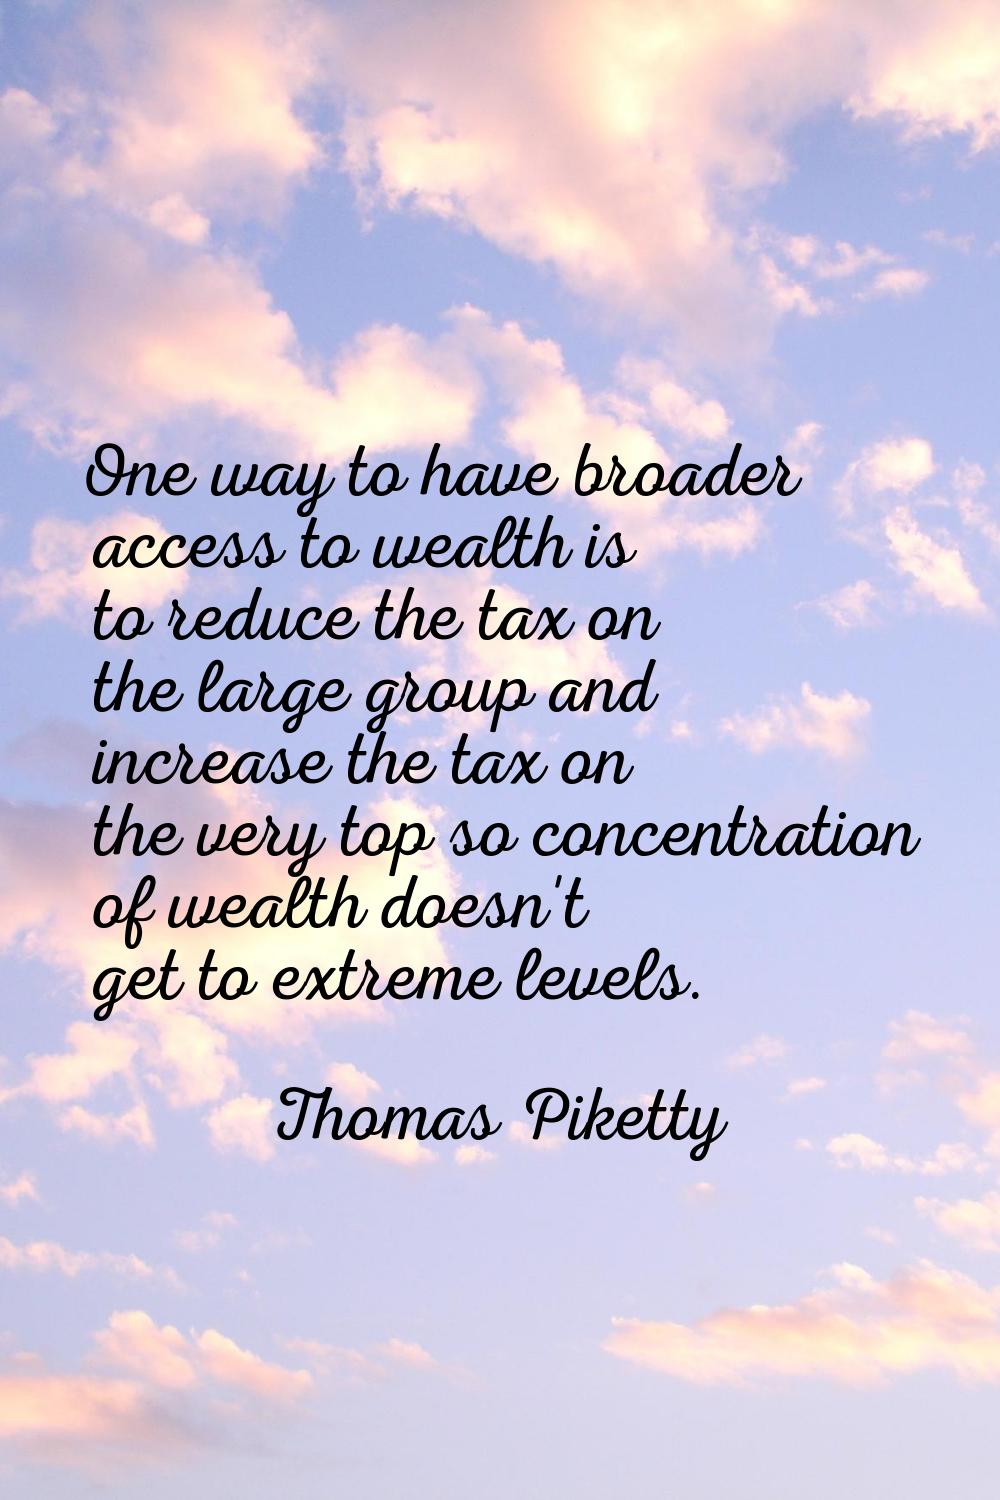 One way to have broader access to wealth is to reduce the tax on the large group and increase the t